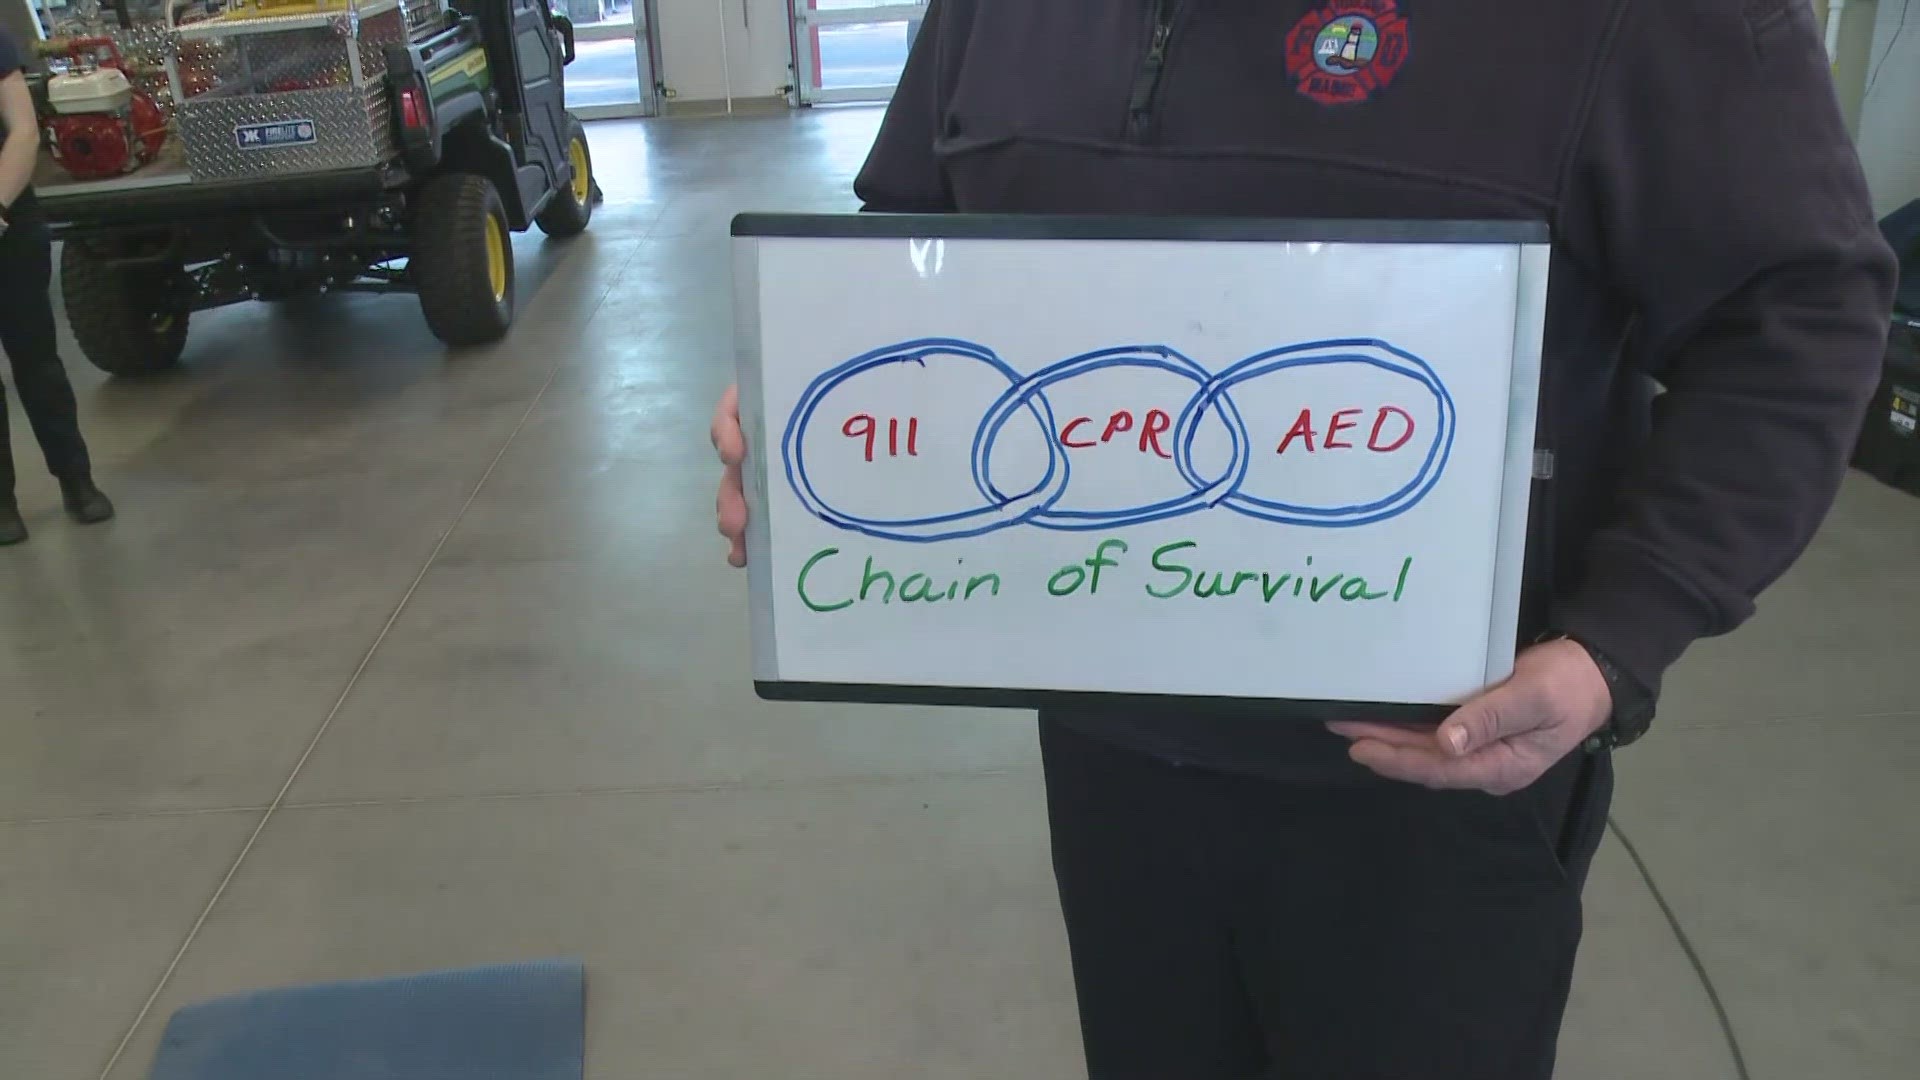 Robb Couture of the South Portland Fire Department said using the "chain of survival" can help someone who is unresponsive: call 9-1-1, perform CPR, and use an AED.